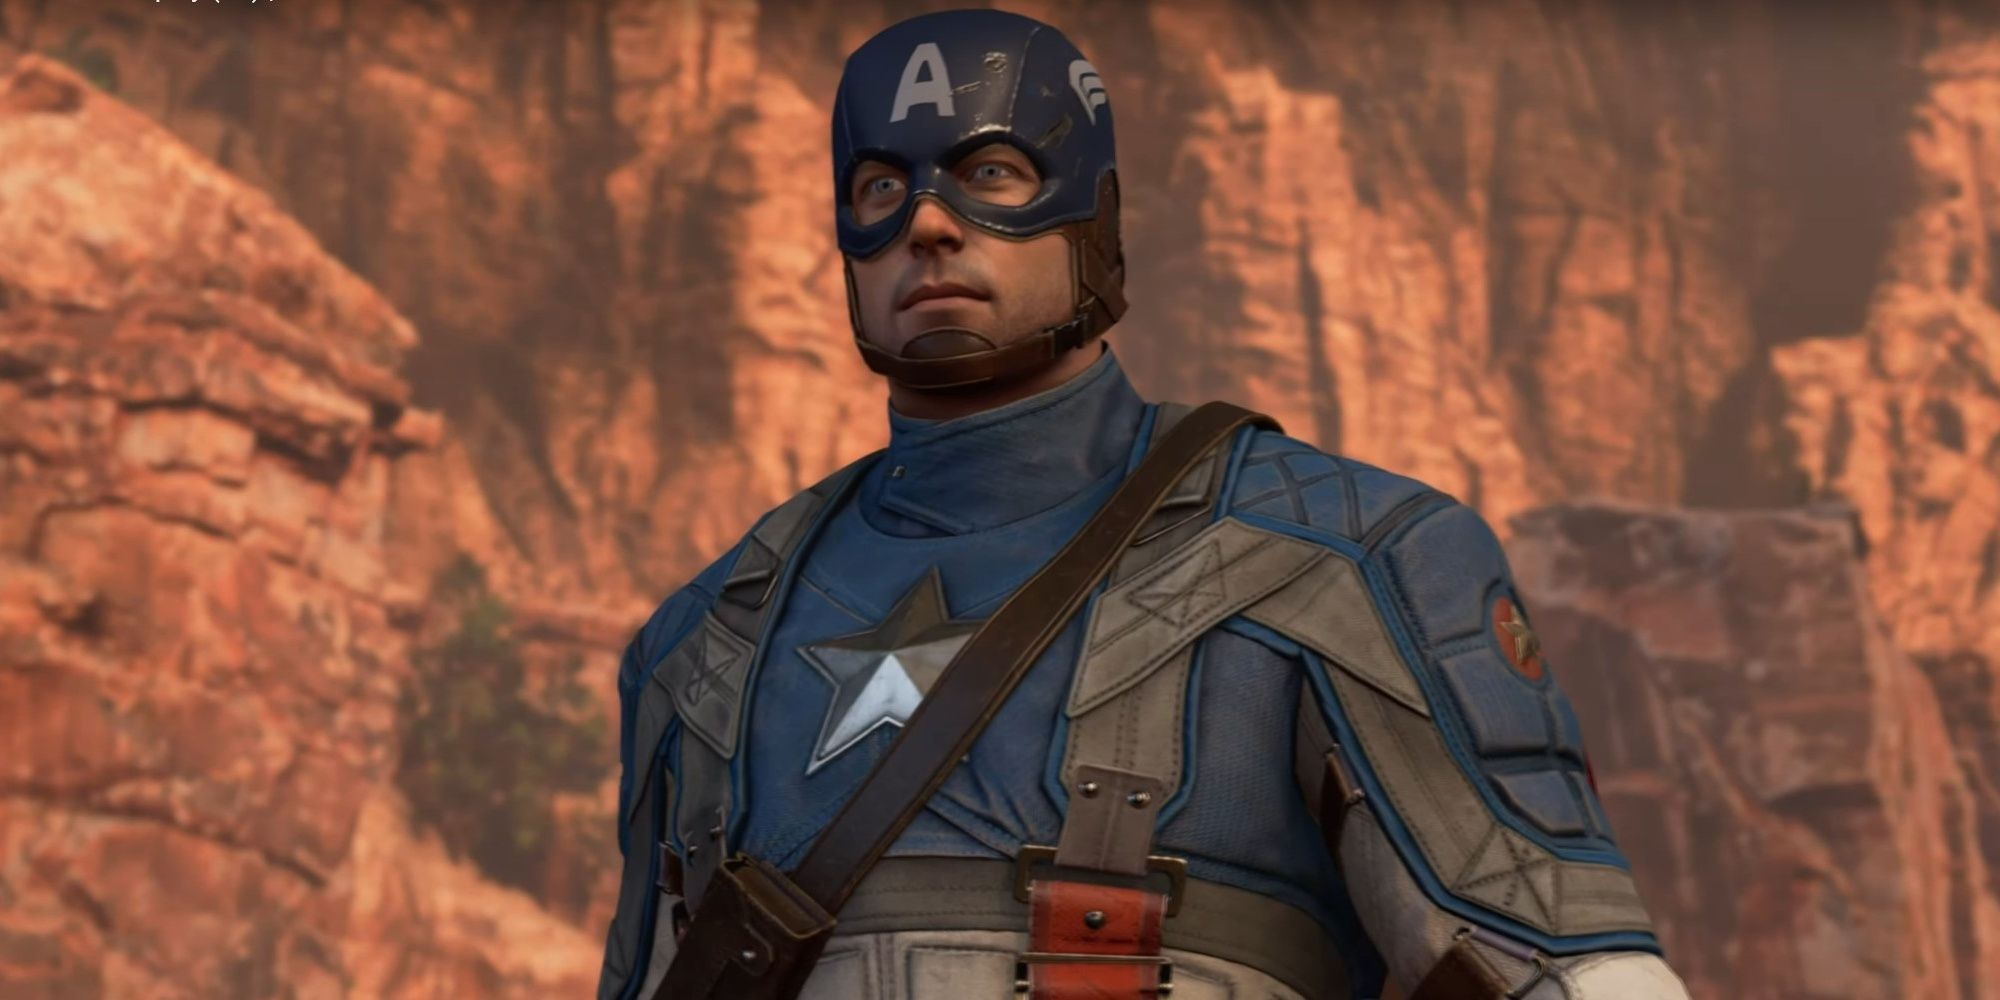 Captain America First Avenger outfit